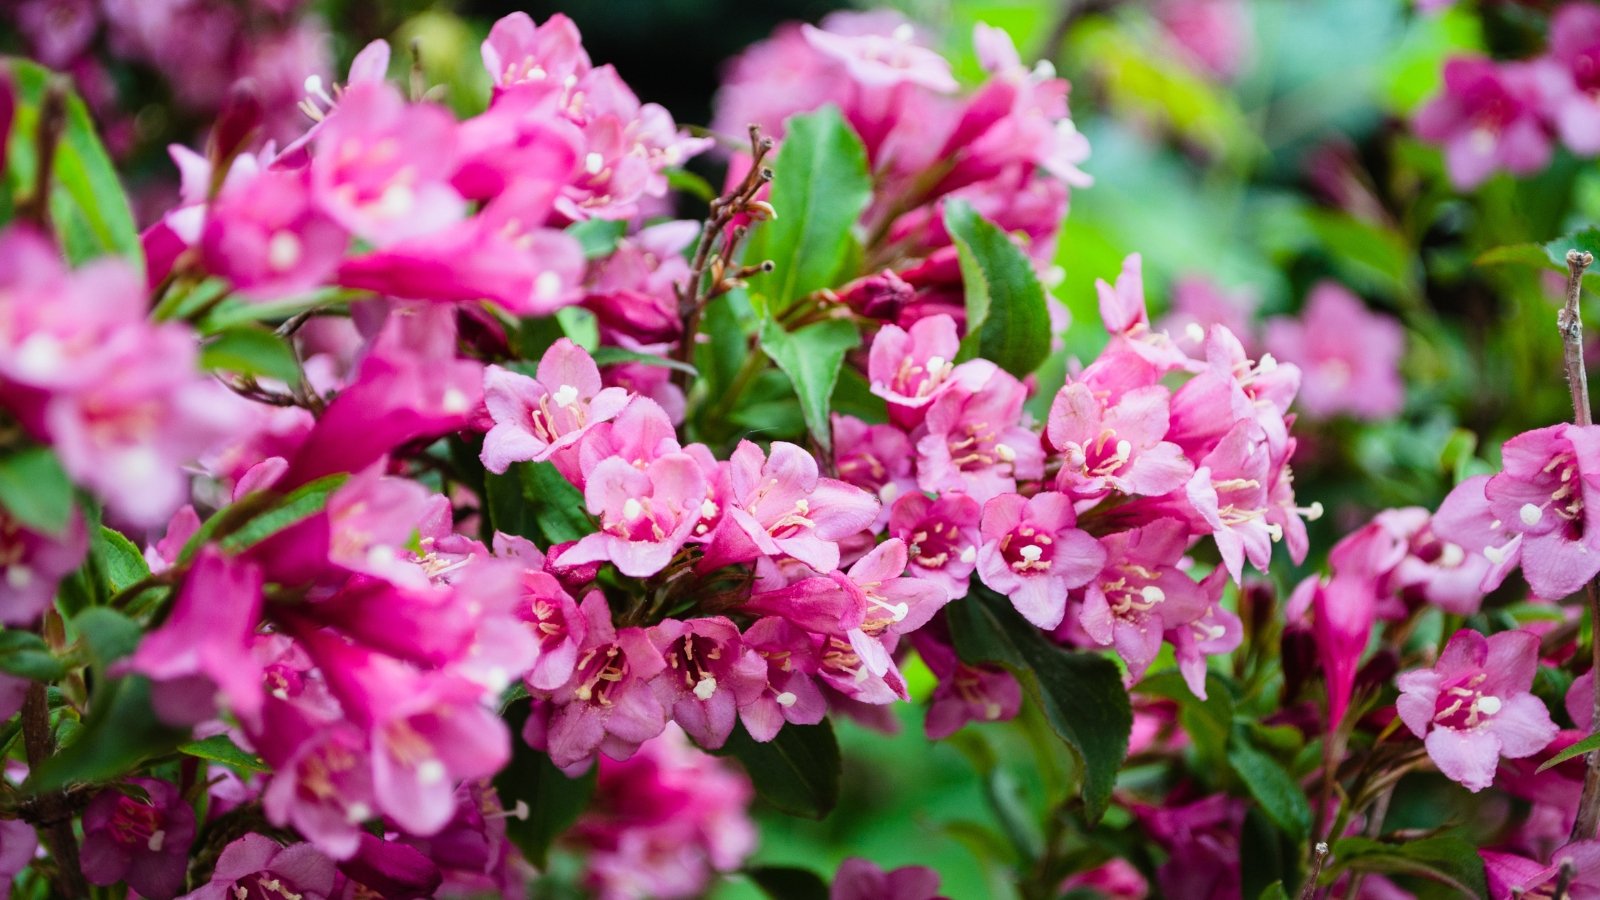 Numerous purple weigela blossoms emerge, nestled among lush green foliage, creating a picturesque garden scene filled with nature's beauty and harmony.